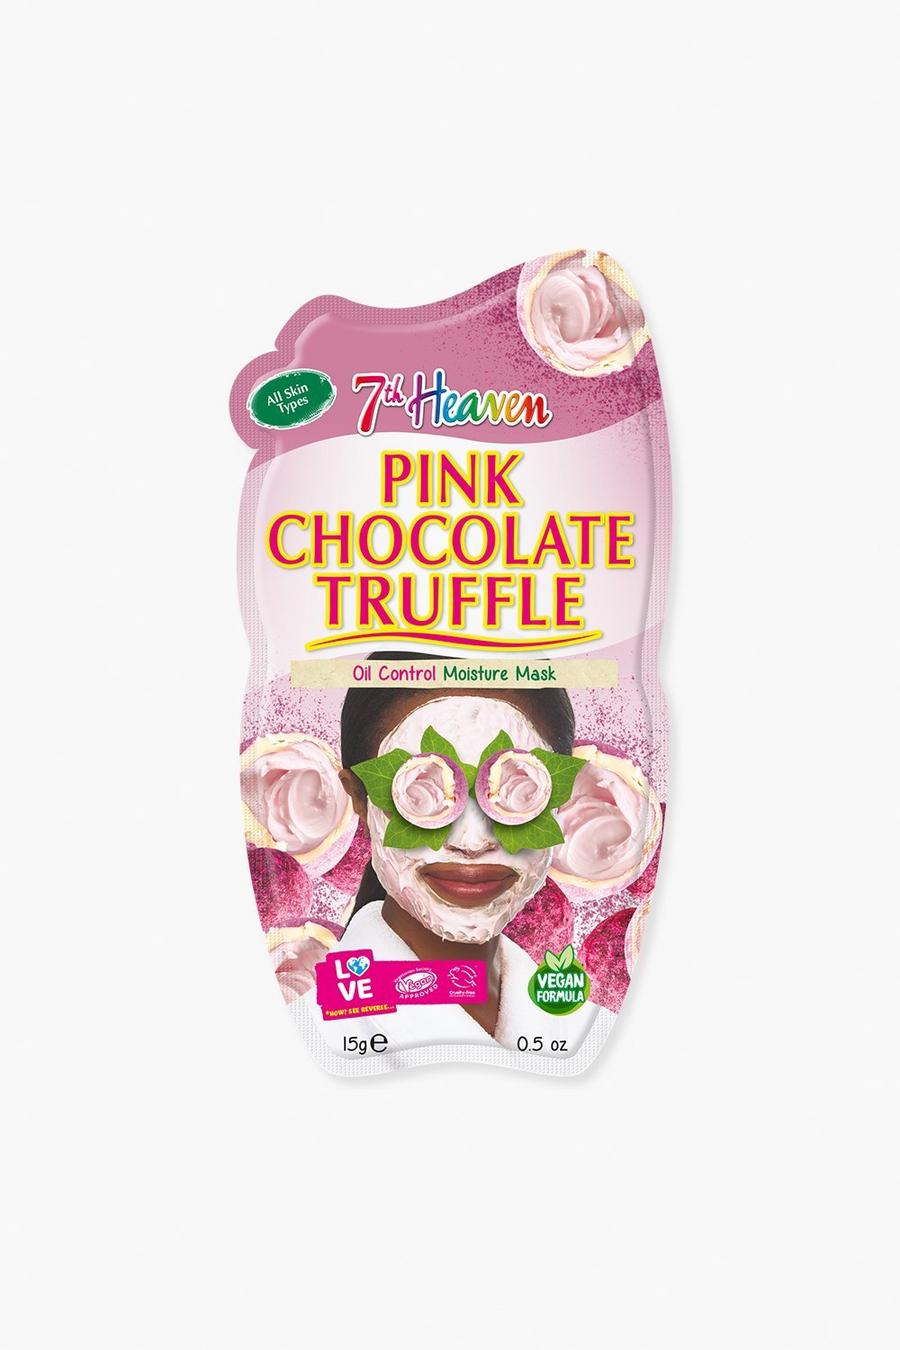 7TH HEAVEN PINK CHOCOLATE TRUFFLE FACE MASK